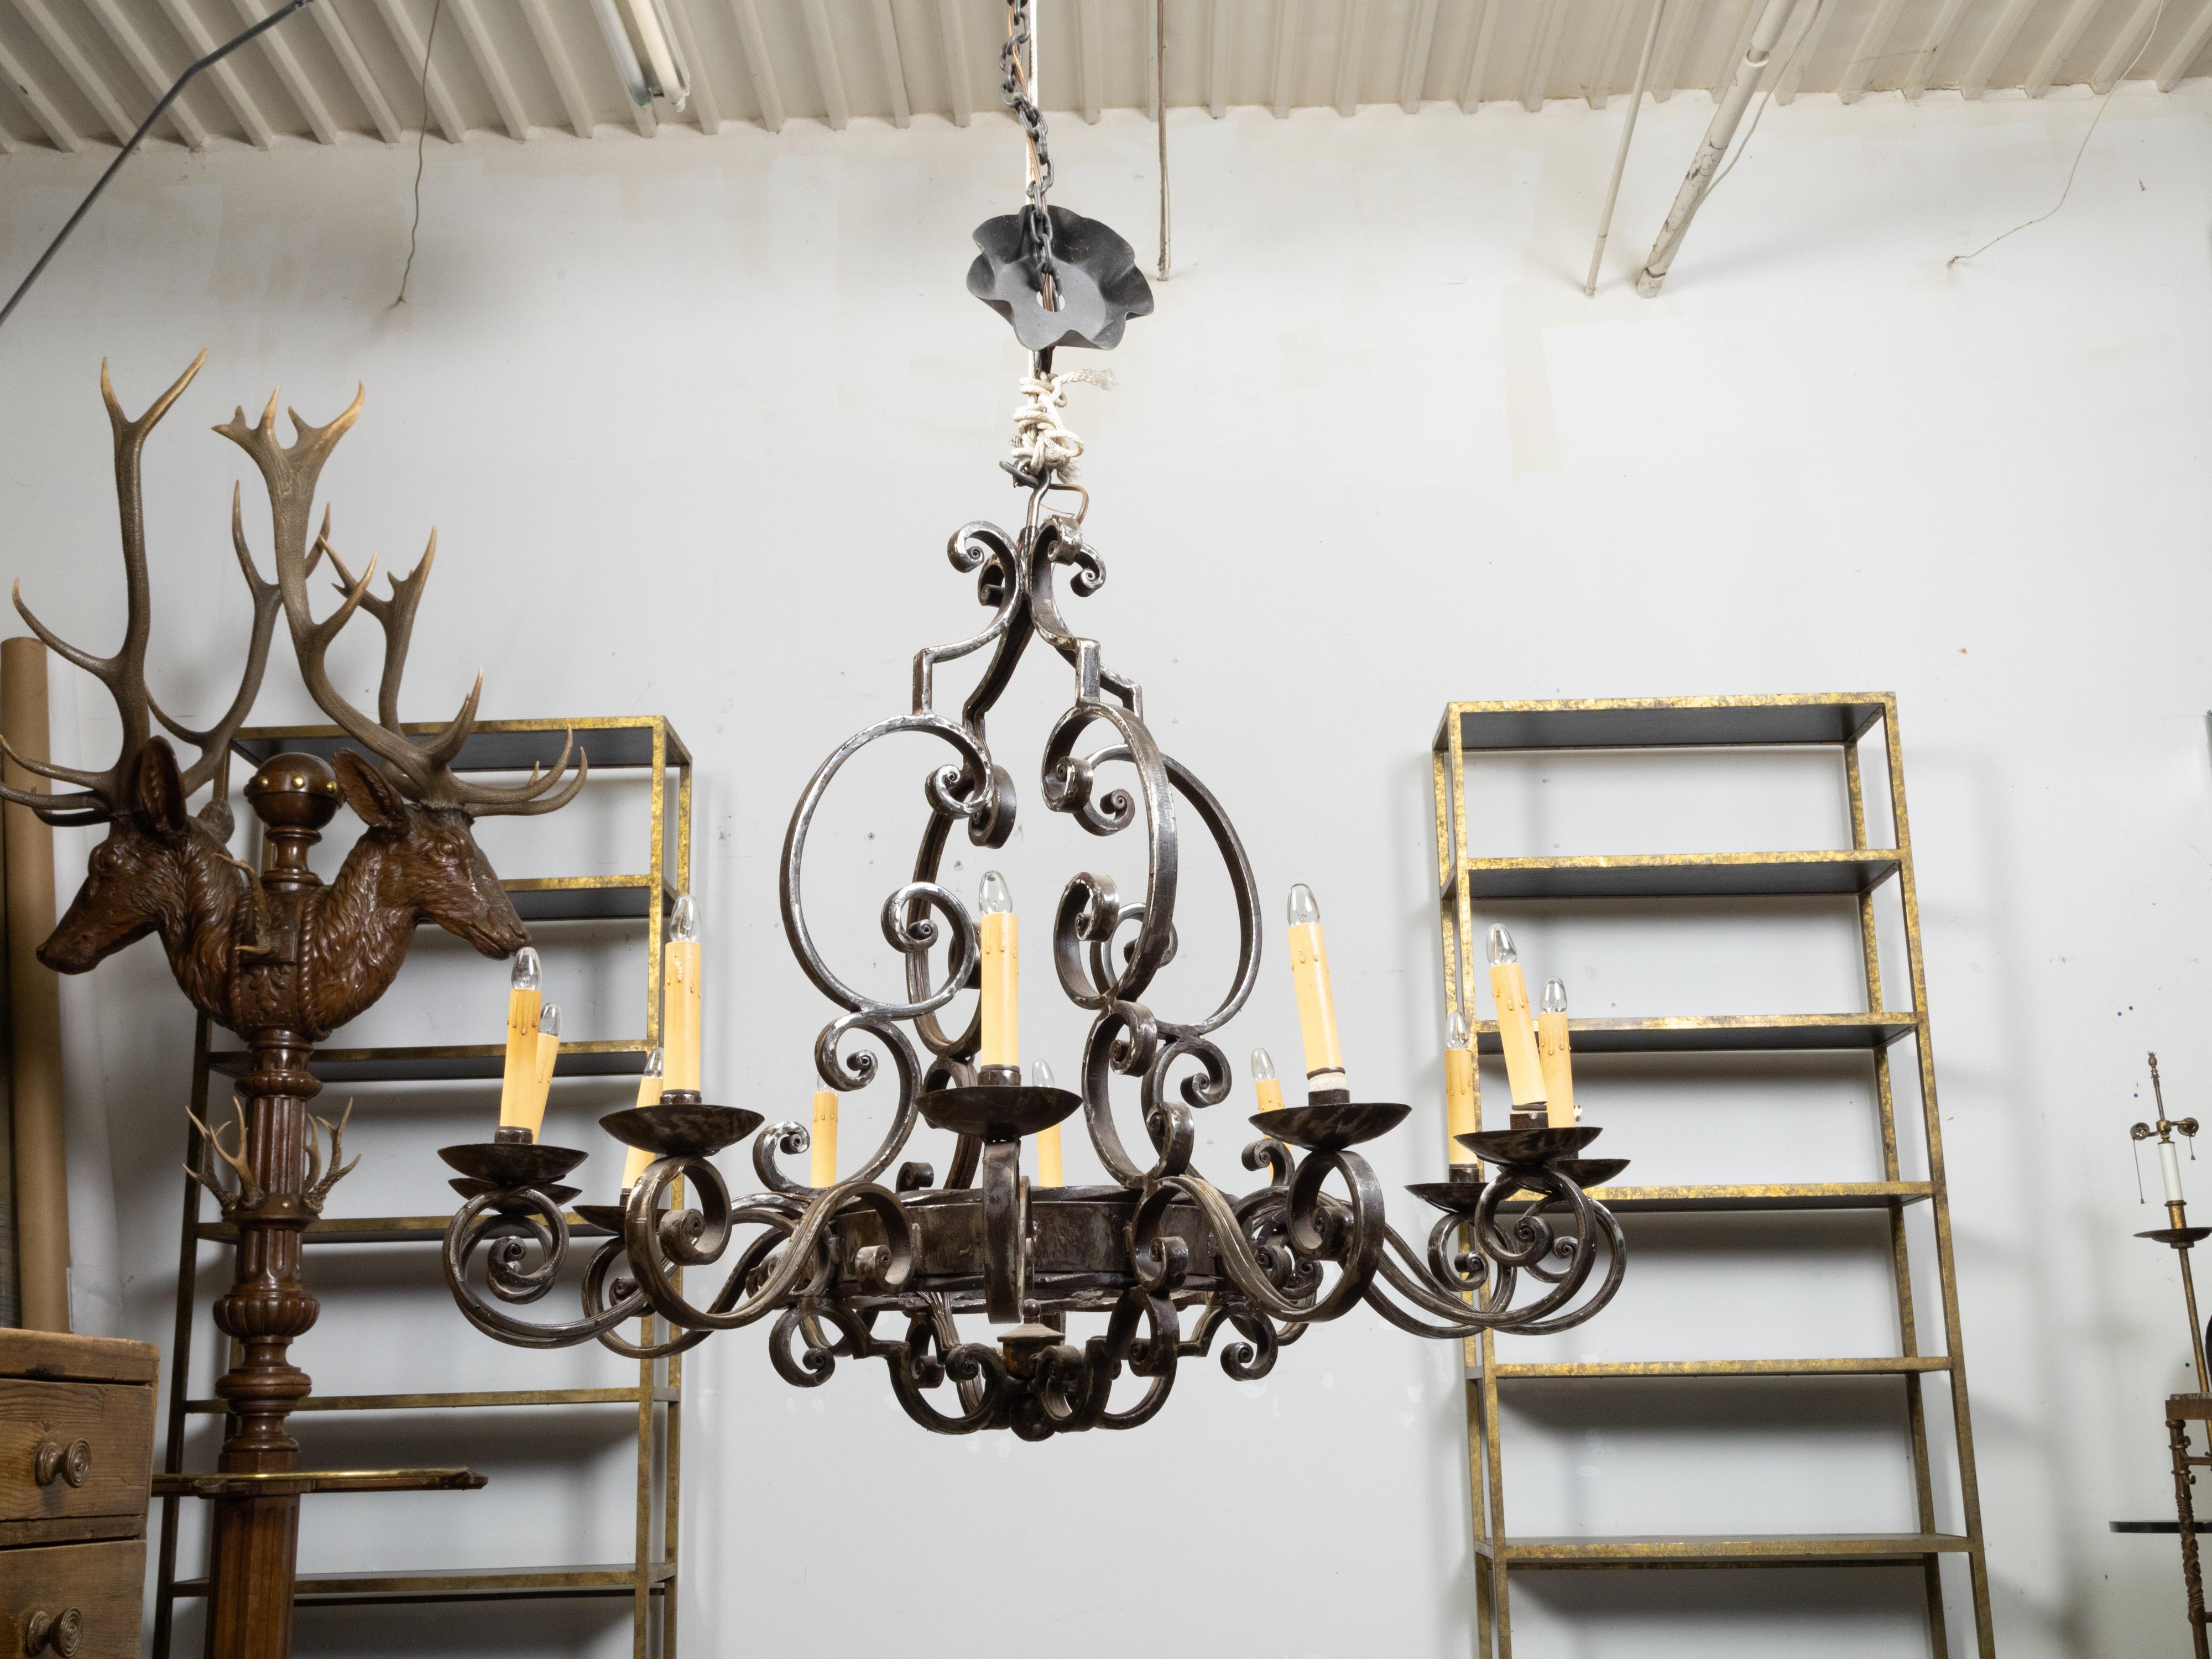 Midcentury French Steel 12-Light Chandelier with Scrolls and Dark Patina For Sale 1